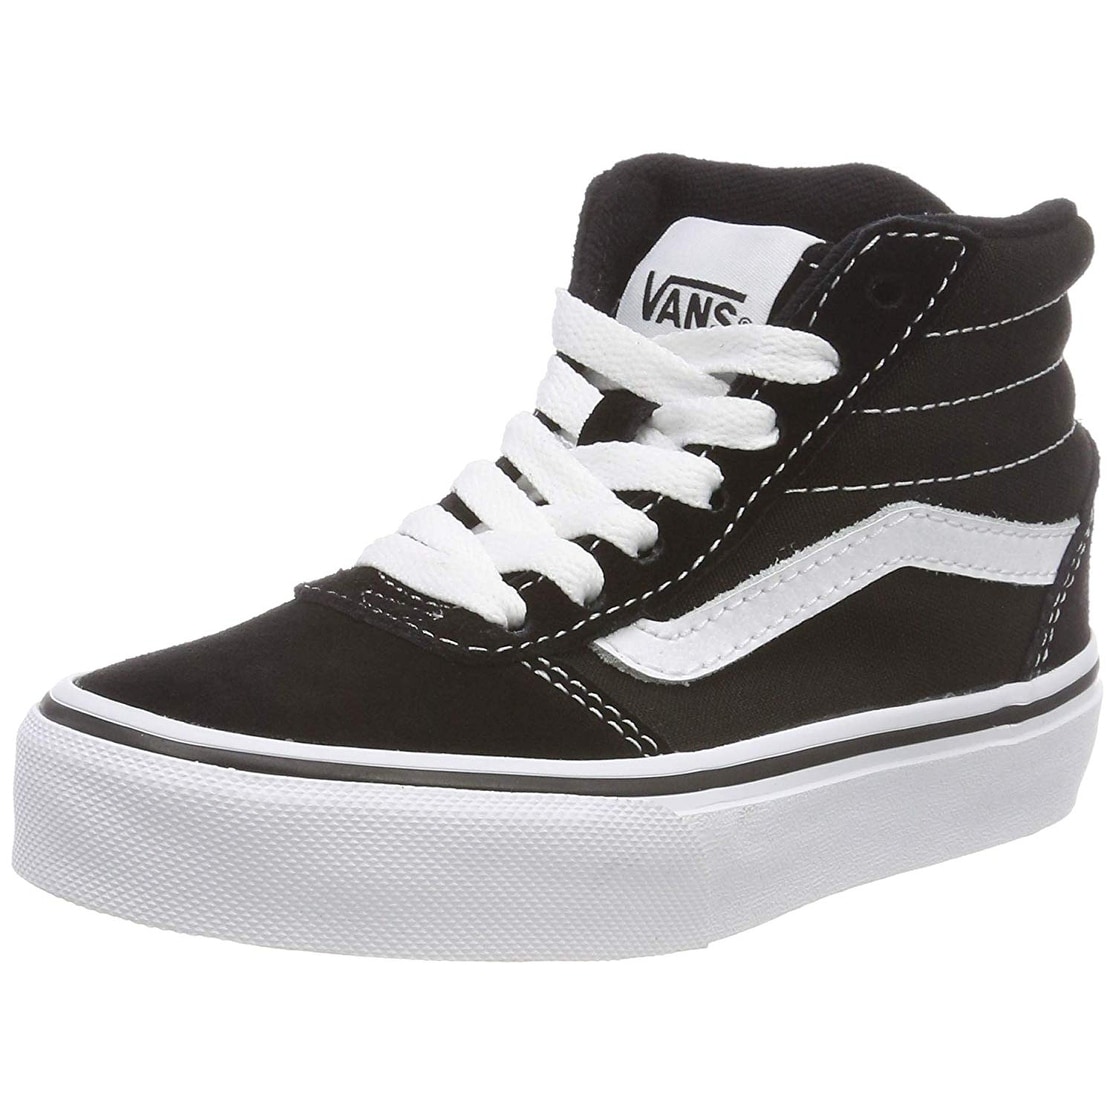 black and white vans size 6